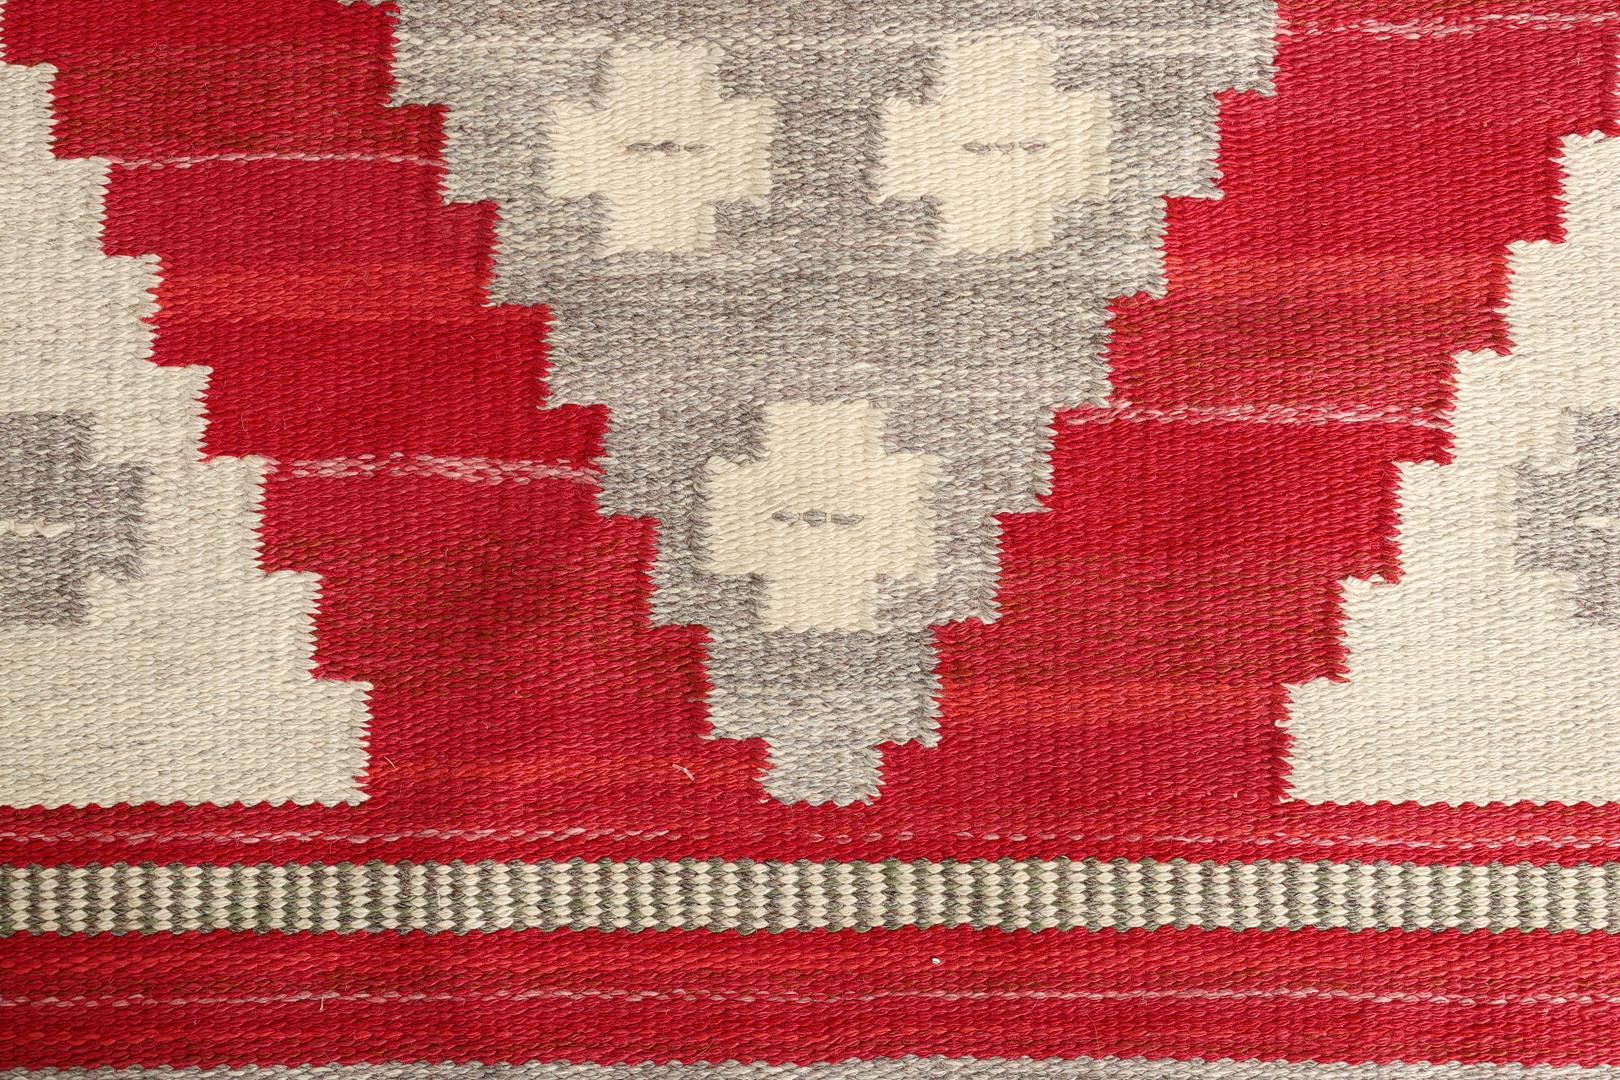 1960’s Swedish Flatweave 2.08 x 1.43m

Handwoven. Geometric grey mottled tones with red background. In lovely original condition with minor detail to fringe. 

Halv-flossa or relief-flossa—translated half pile or relief pile— is the name for a kind